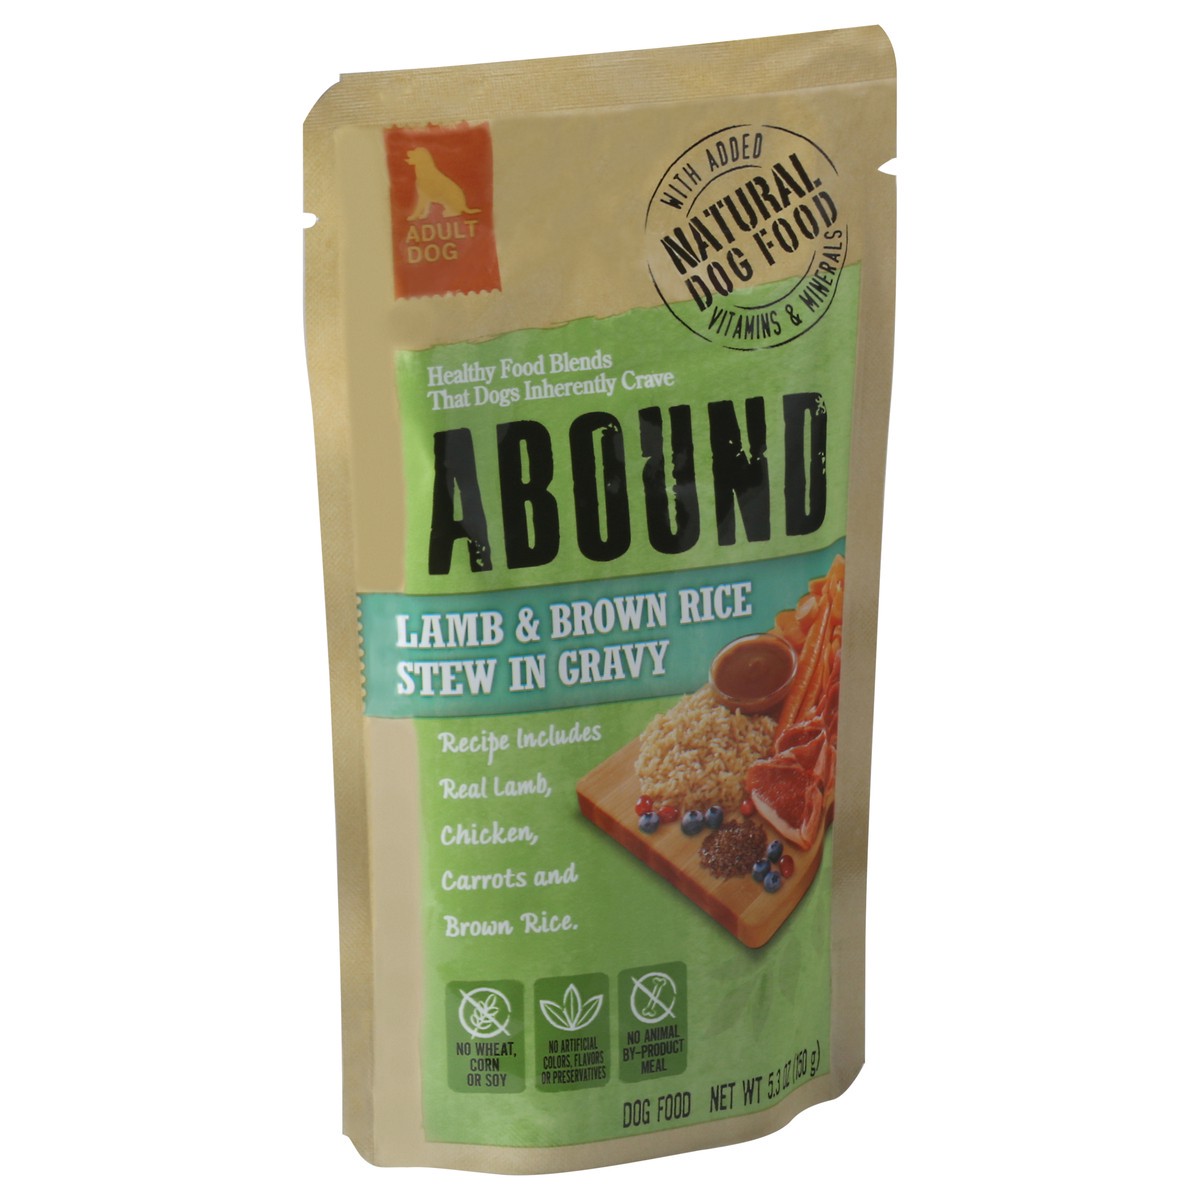 slide 2 of 9, Abound Natural Lamb & Brown Rice Stew in Gravy Adult Dog Food 5.3 oz Pouch, 5.3 oz